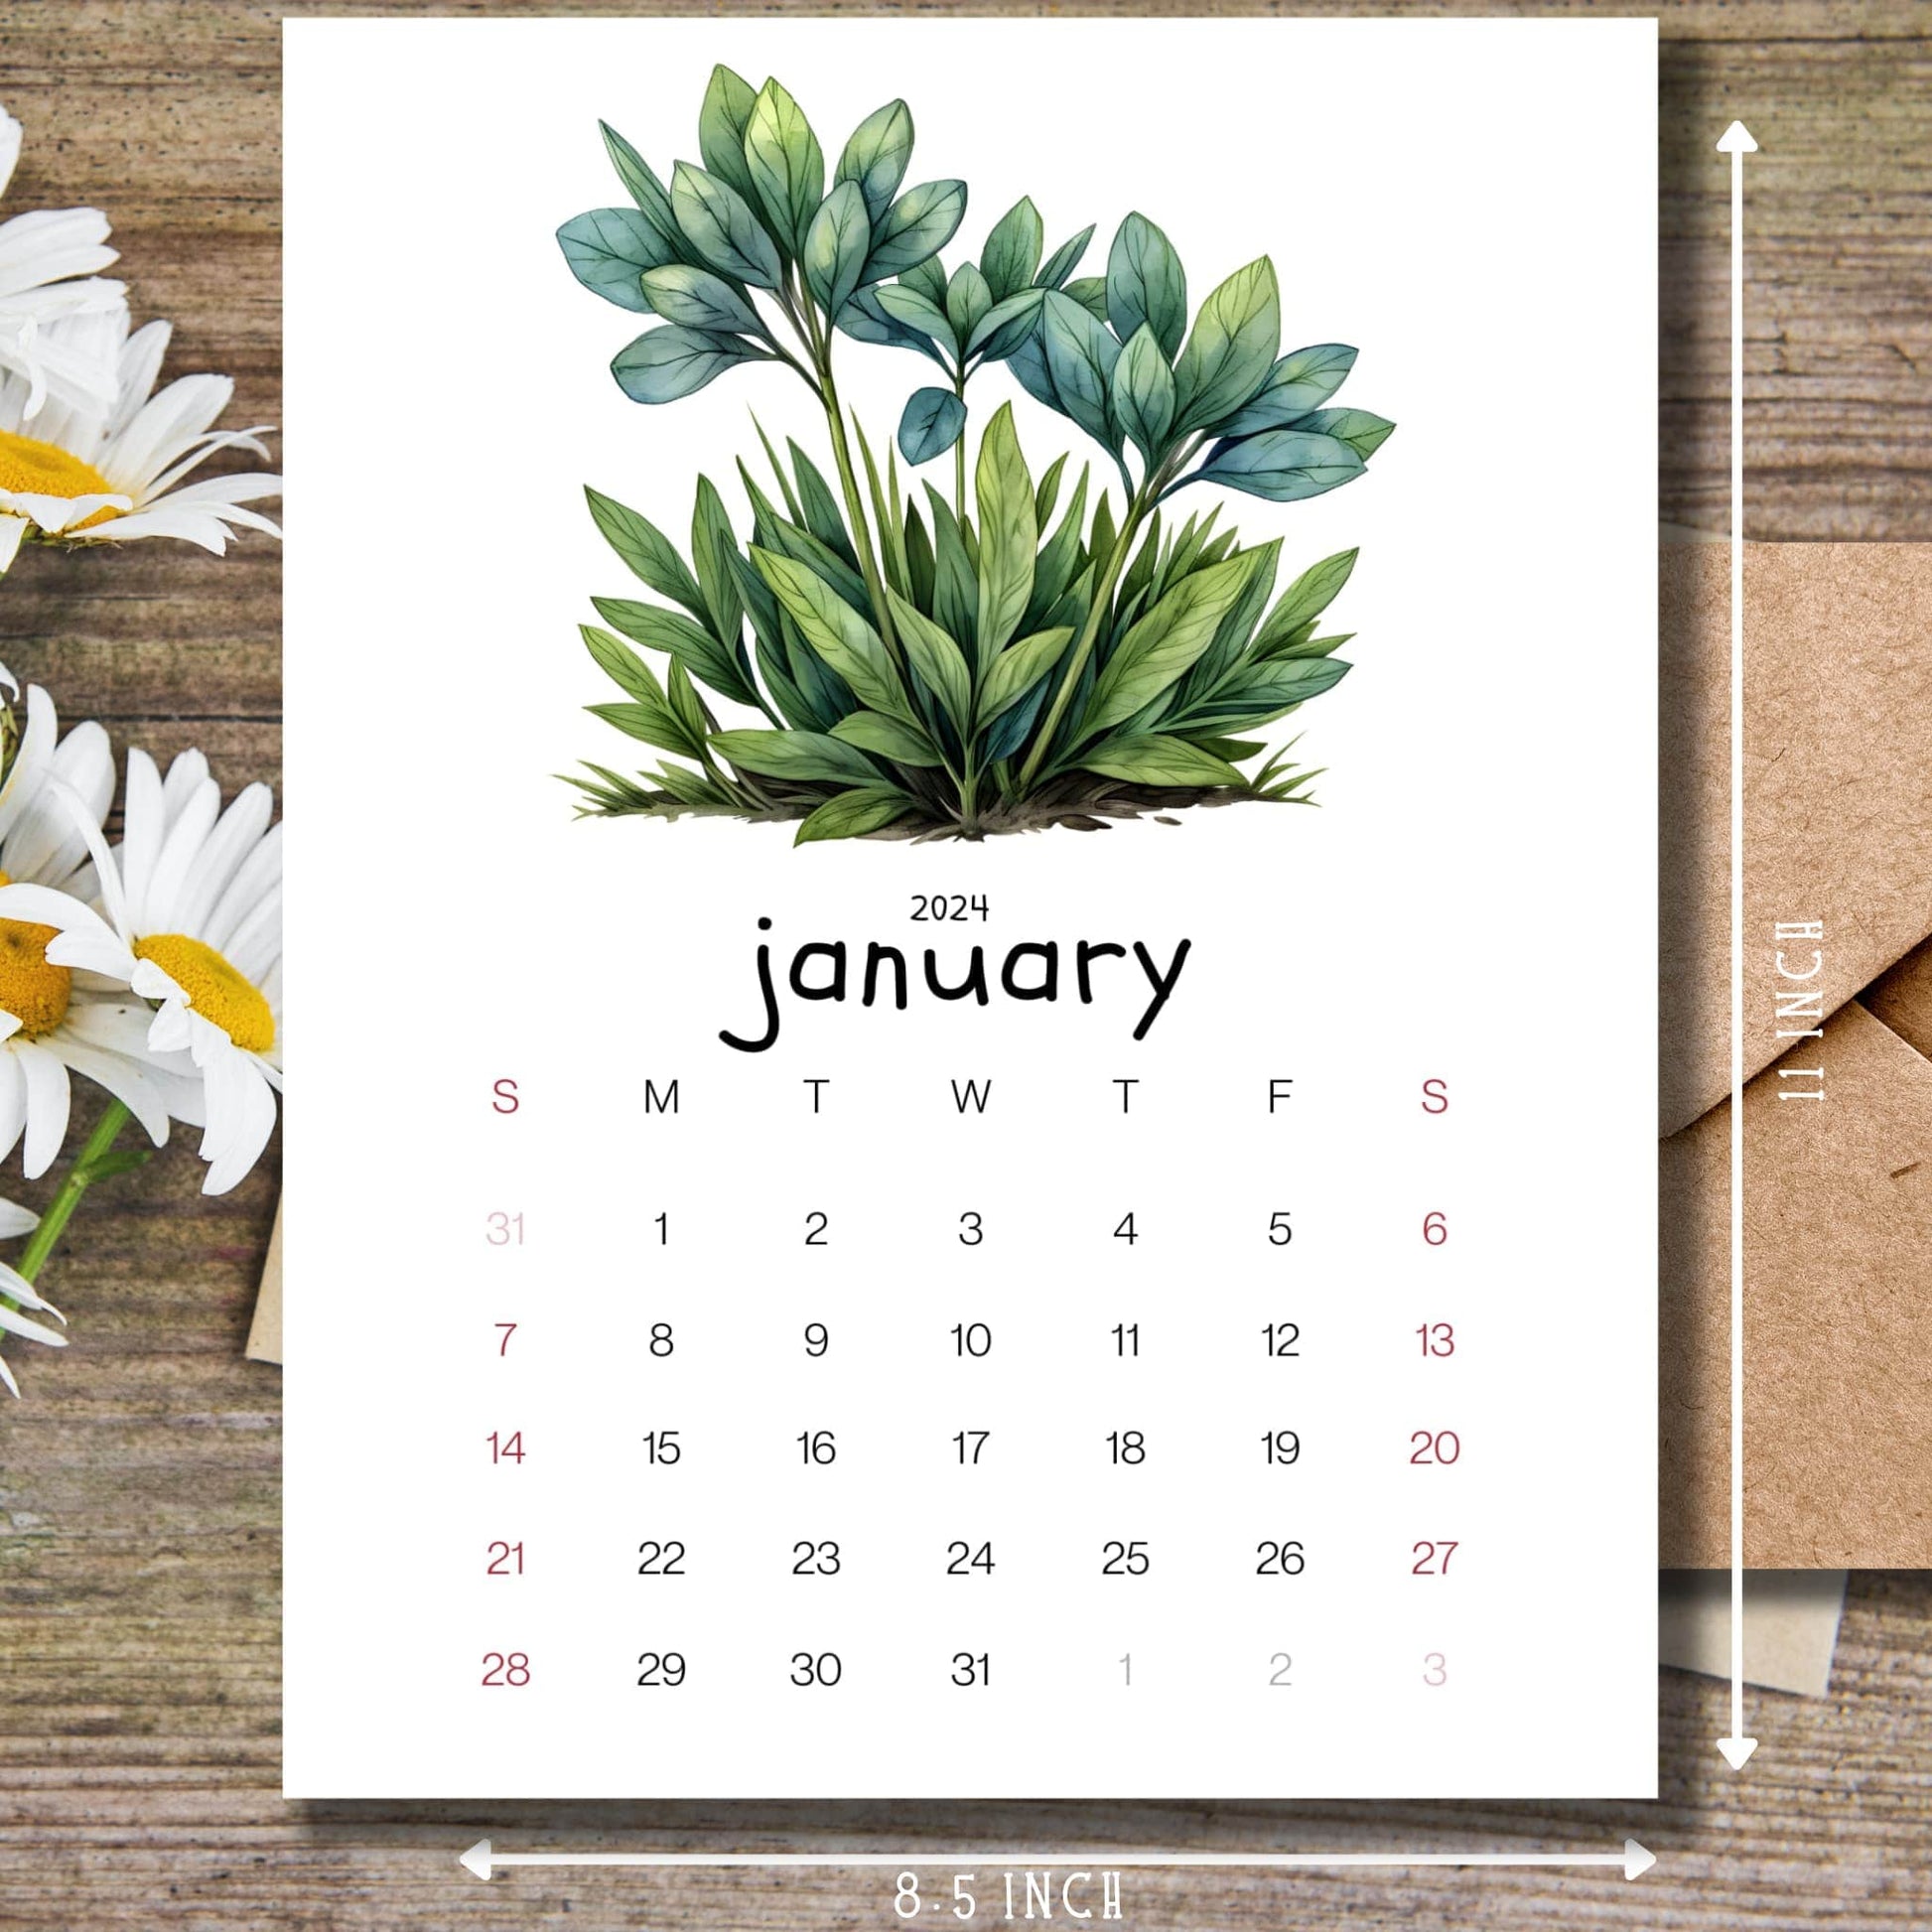  Alpine Plant January 2024 calendar on a wooden desk with white flowers and a size guide.